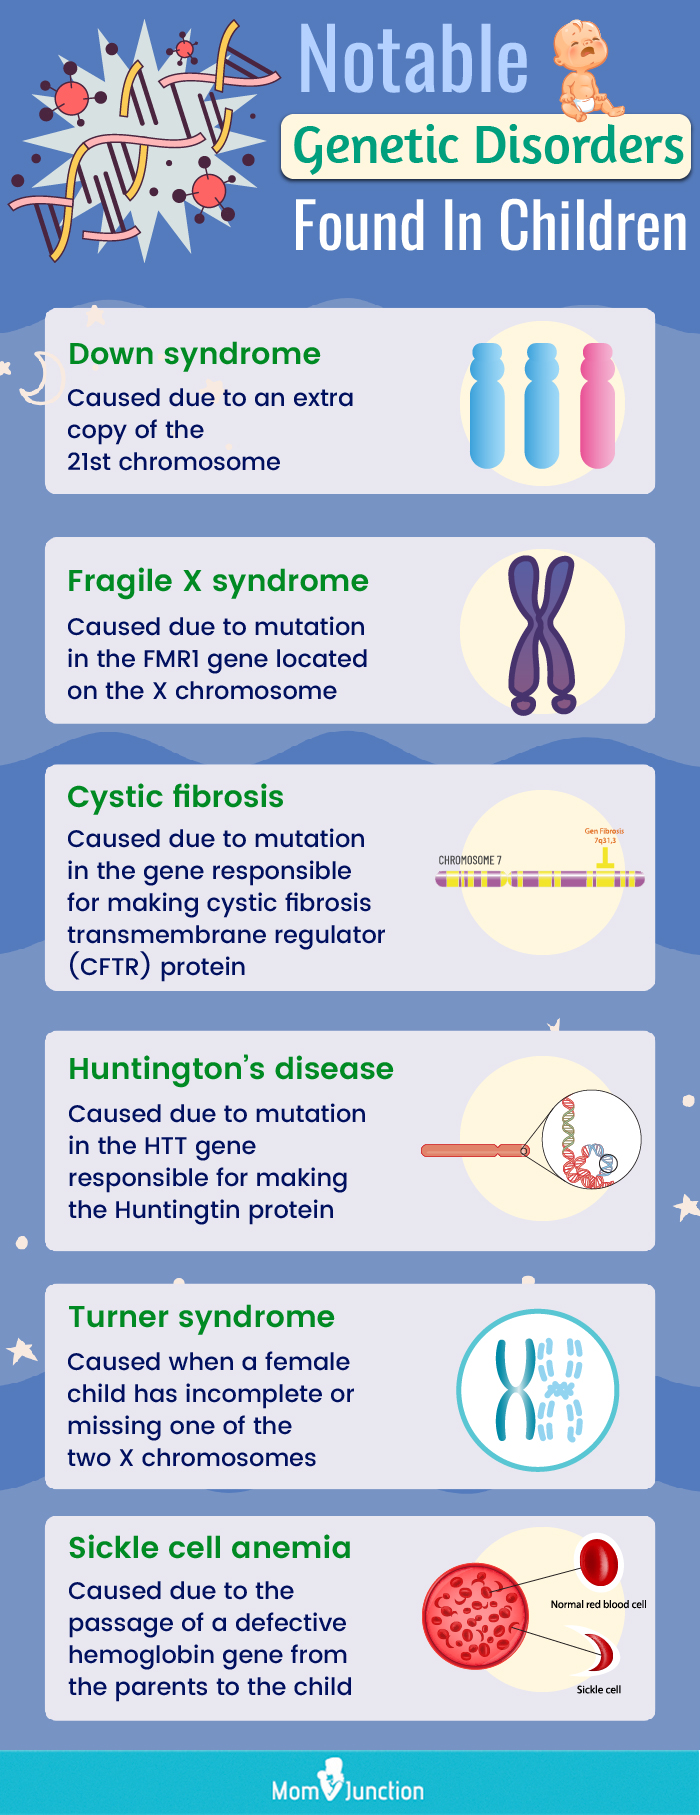 notable genetic disorders found in children (infographic)